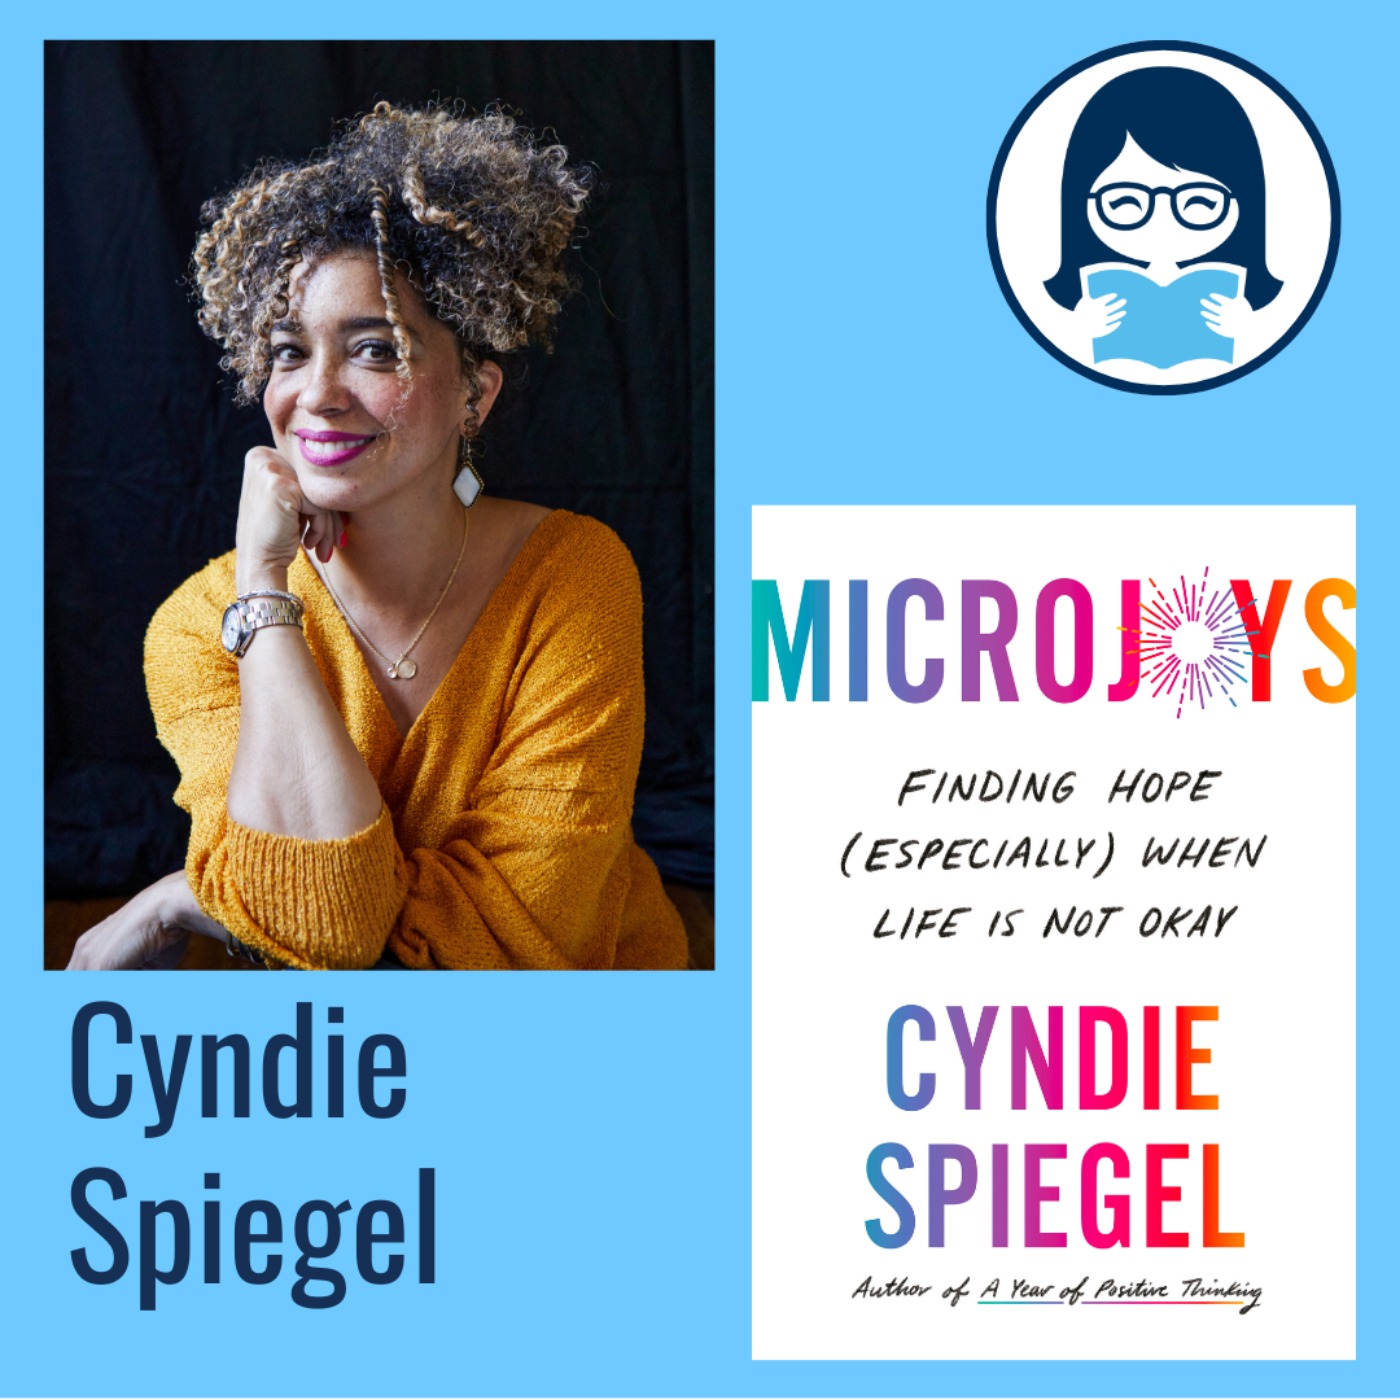 Cyndie Spiegel, MICROJOYS: Finding Hope (Especially) When Life Is Not Okay